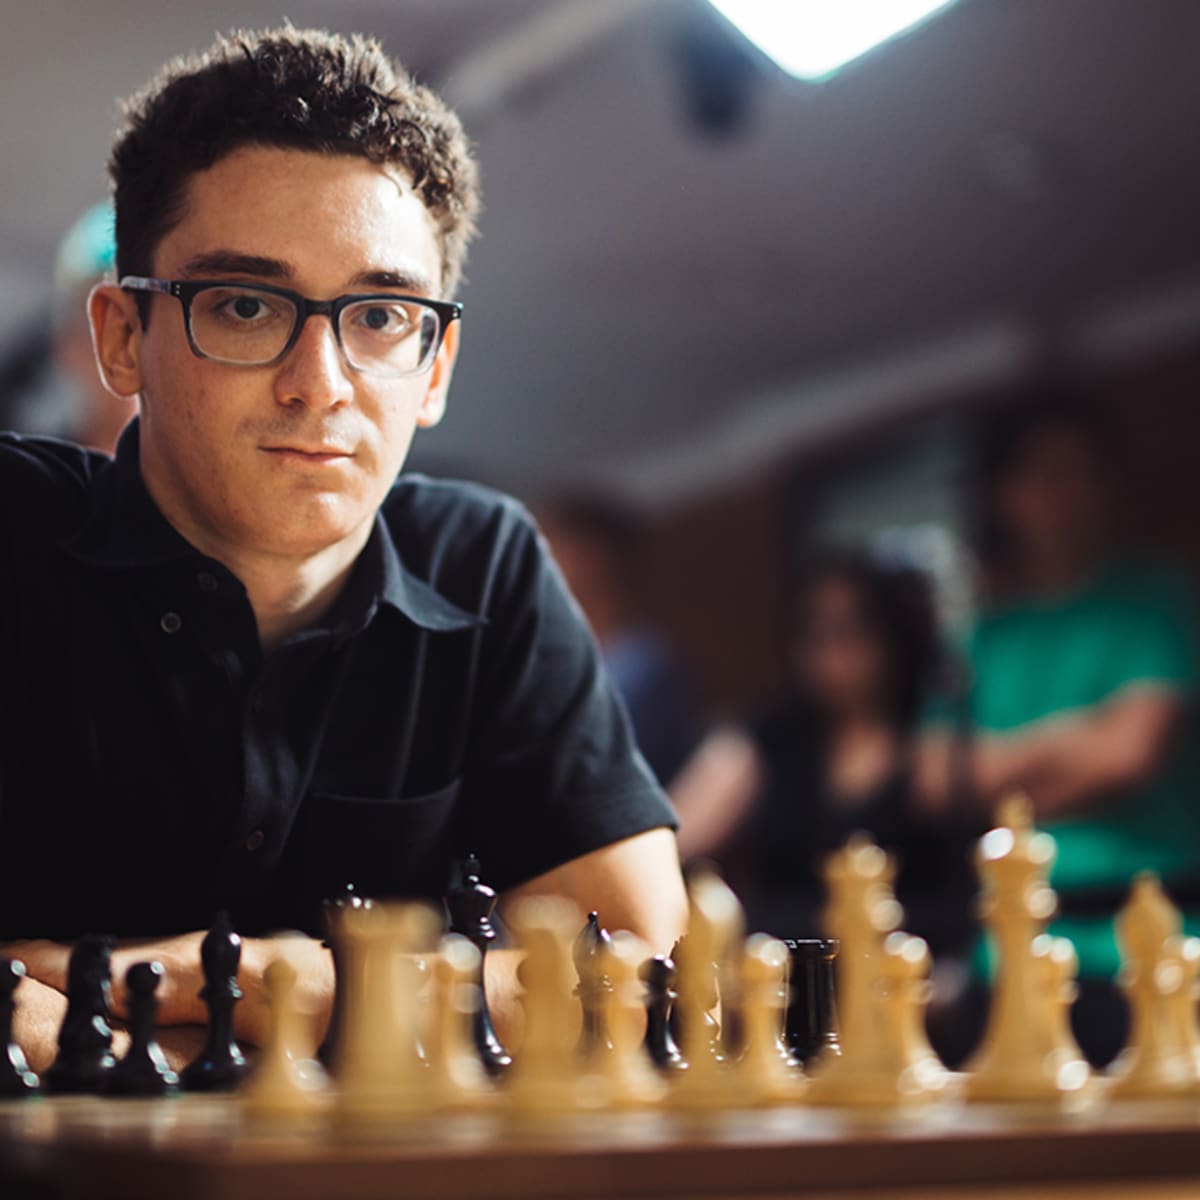 Who Is Fabiano Caruana? Player Looks to Become First American